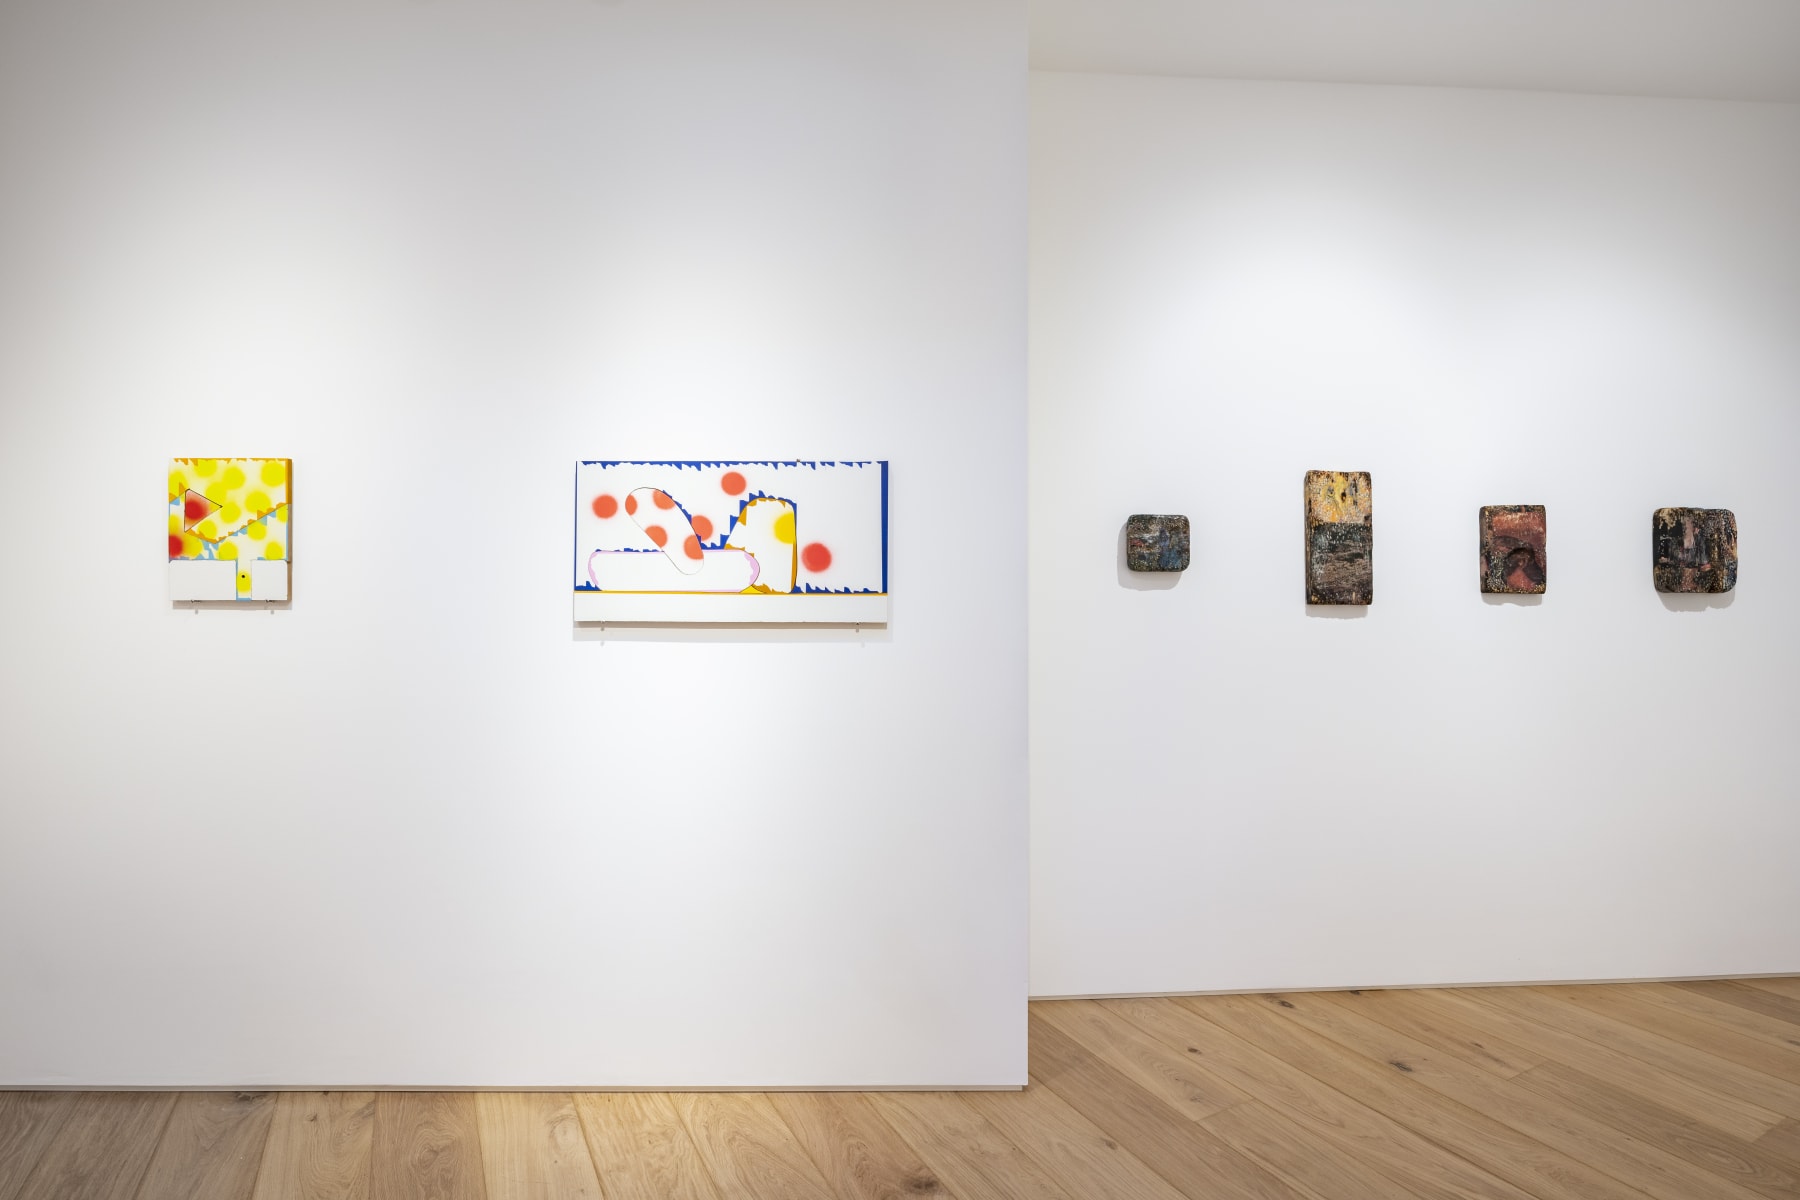 Installation view of Off The Grid, works by Alexandre Canonico and Anderson Borba, London, 2021.